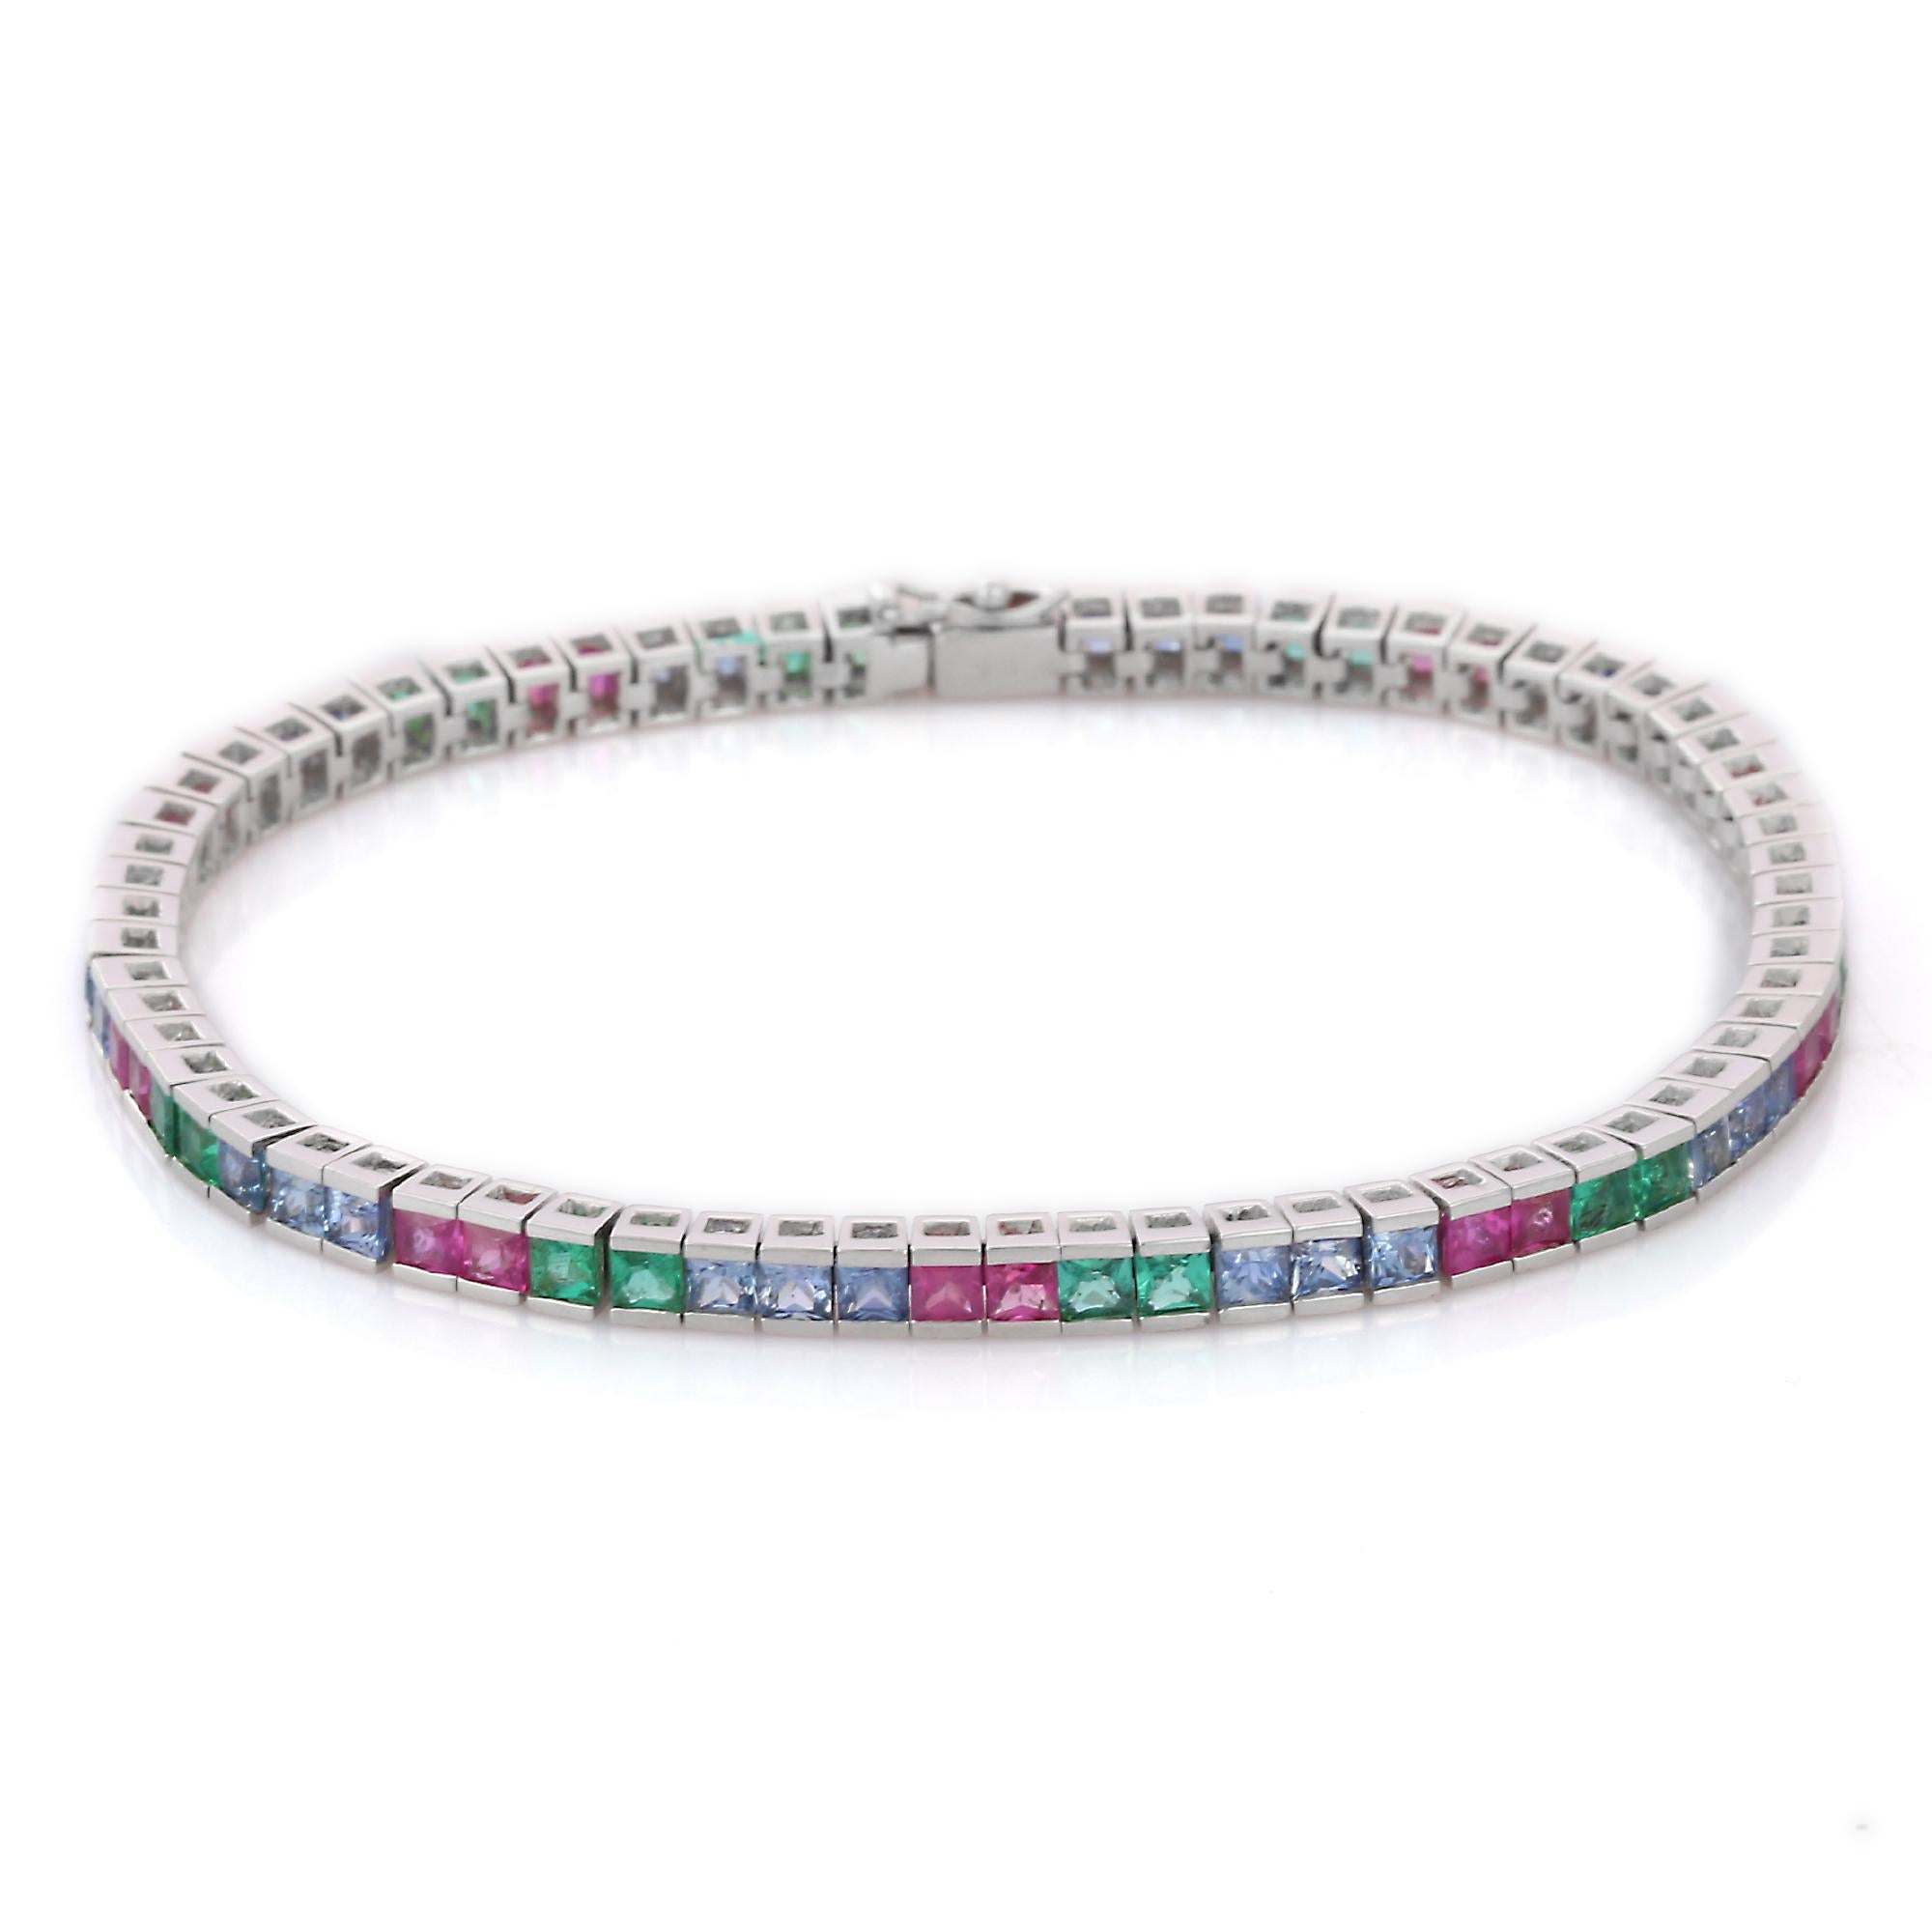 Emerald, Ruby and Sapphire bracelet in 18K Gold. It has a perfect square cut gemstone to make you stand out on any occasion or an event.
A tennis bracelet is an essential piece of jewelry when it comes to your wedding day. The sleek and elegant